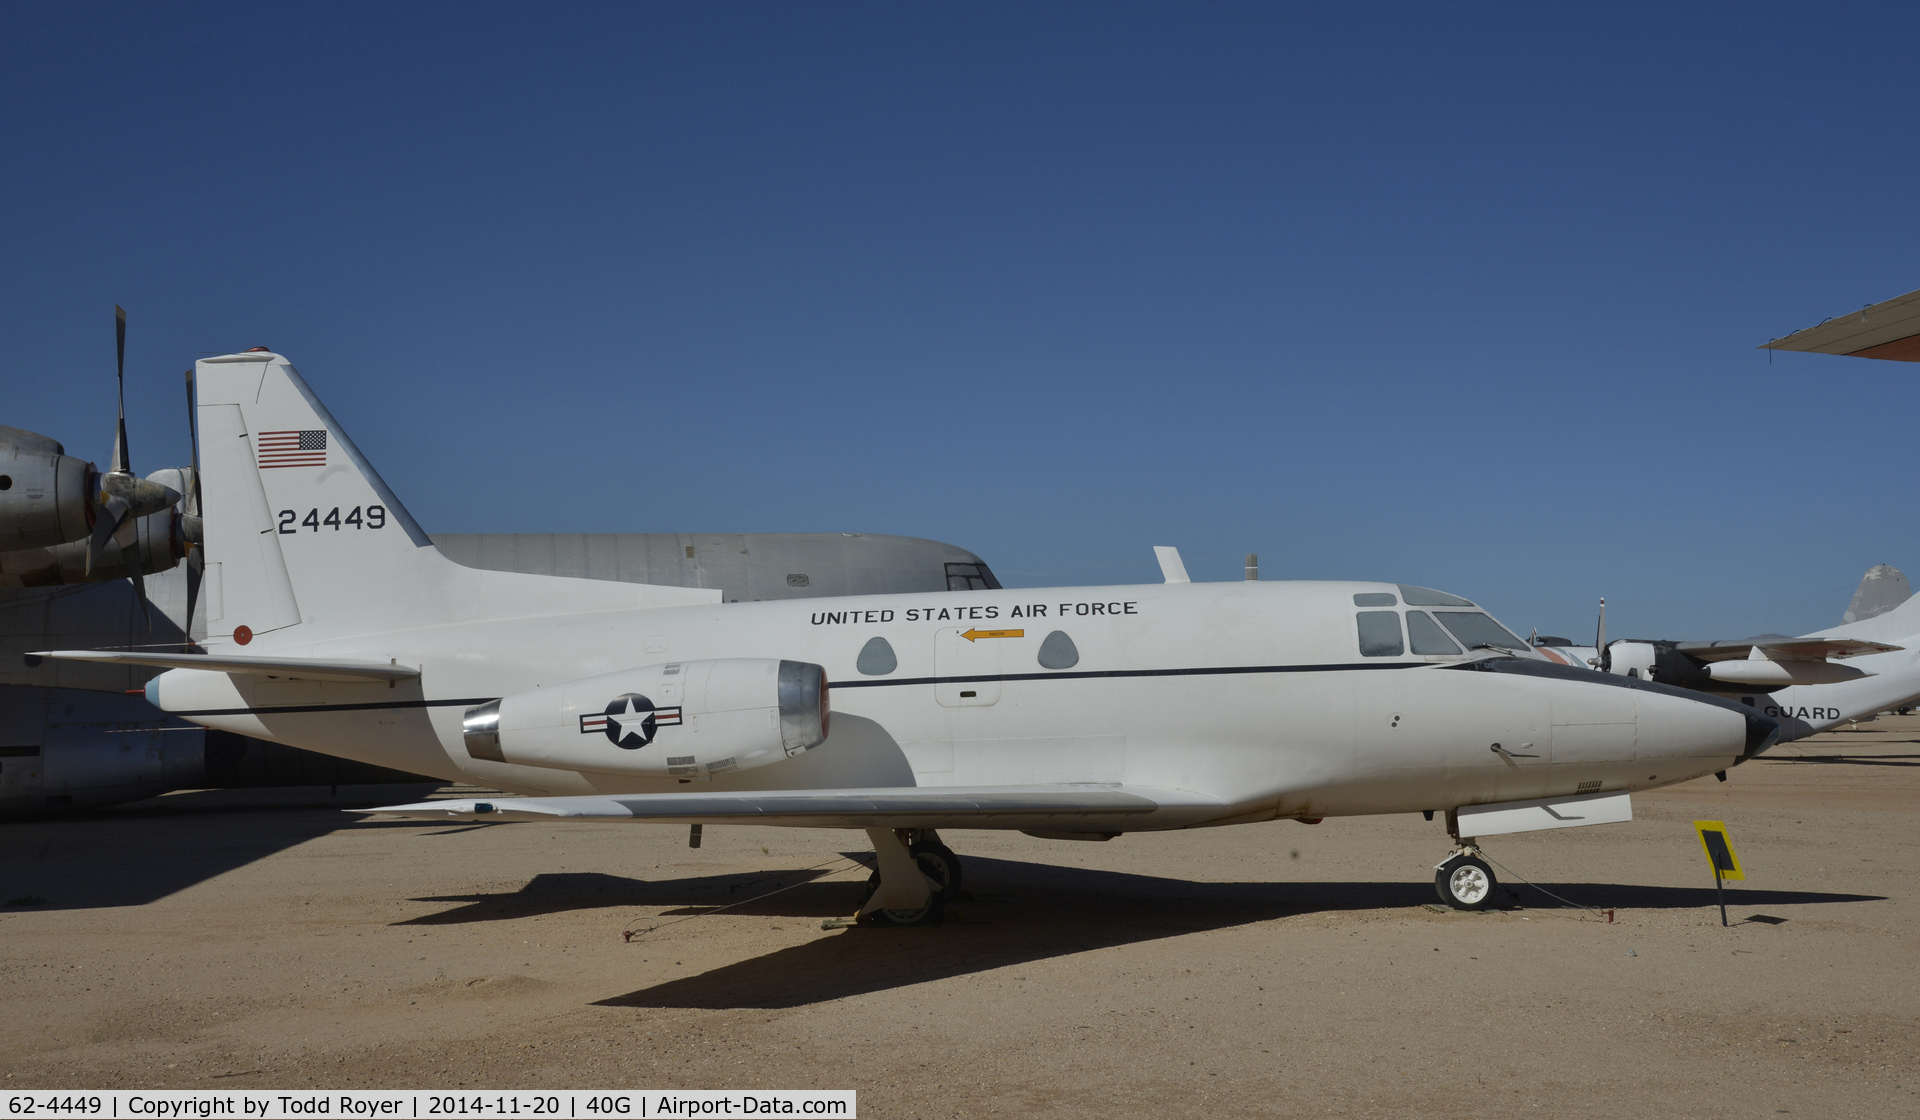 62-4449, 1962 North American CT-39A Sabreliner C/N 276-2, On display at the Pima Air and Space Museum